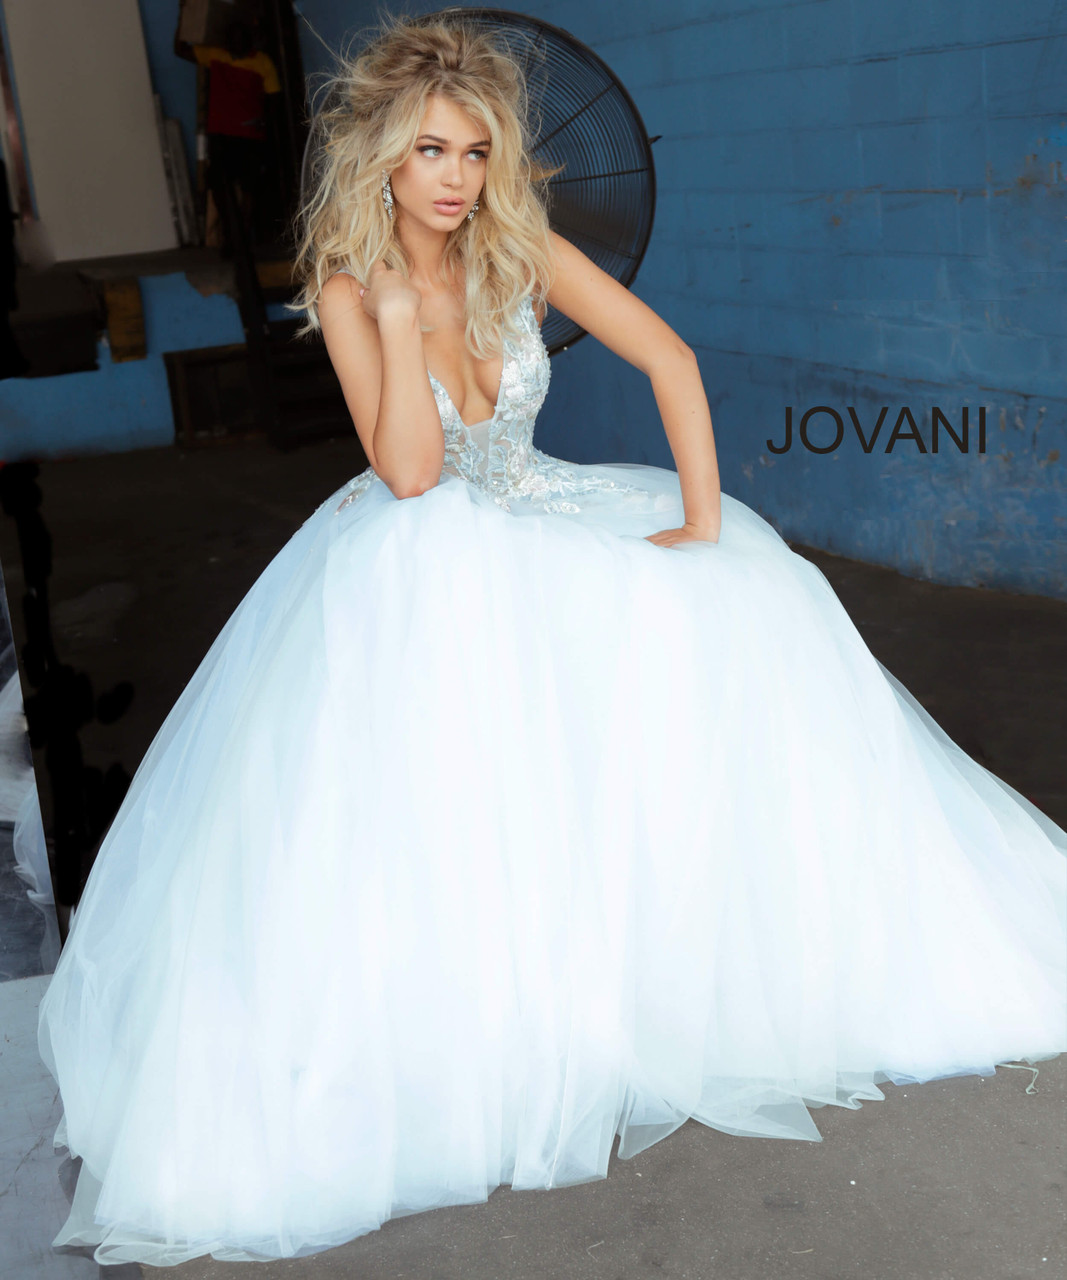 Jovani 11092 Tulle Floral Embroidered Prom Ballgown